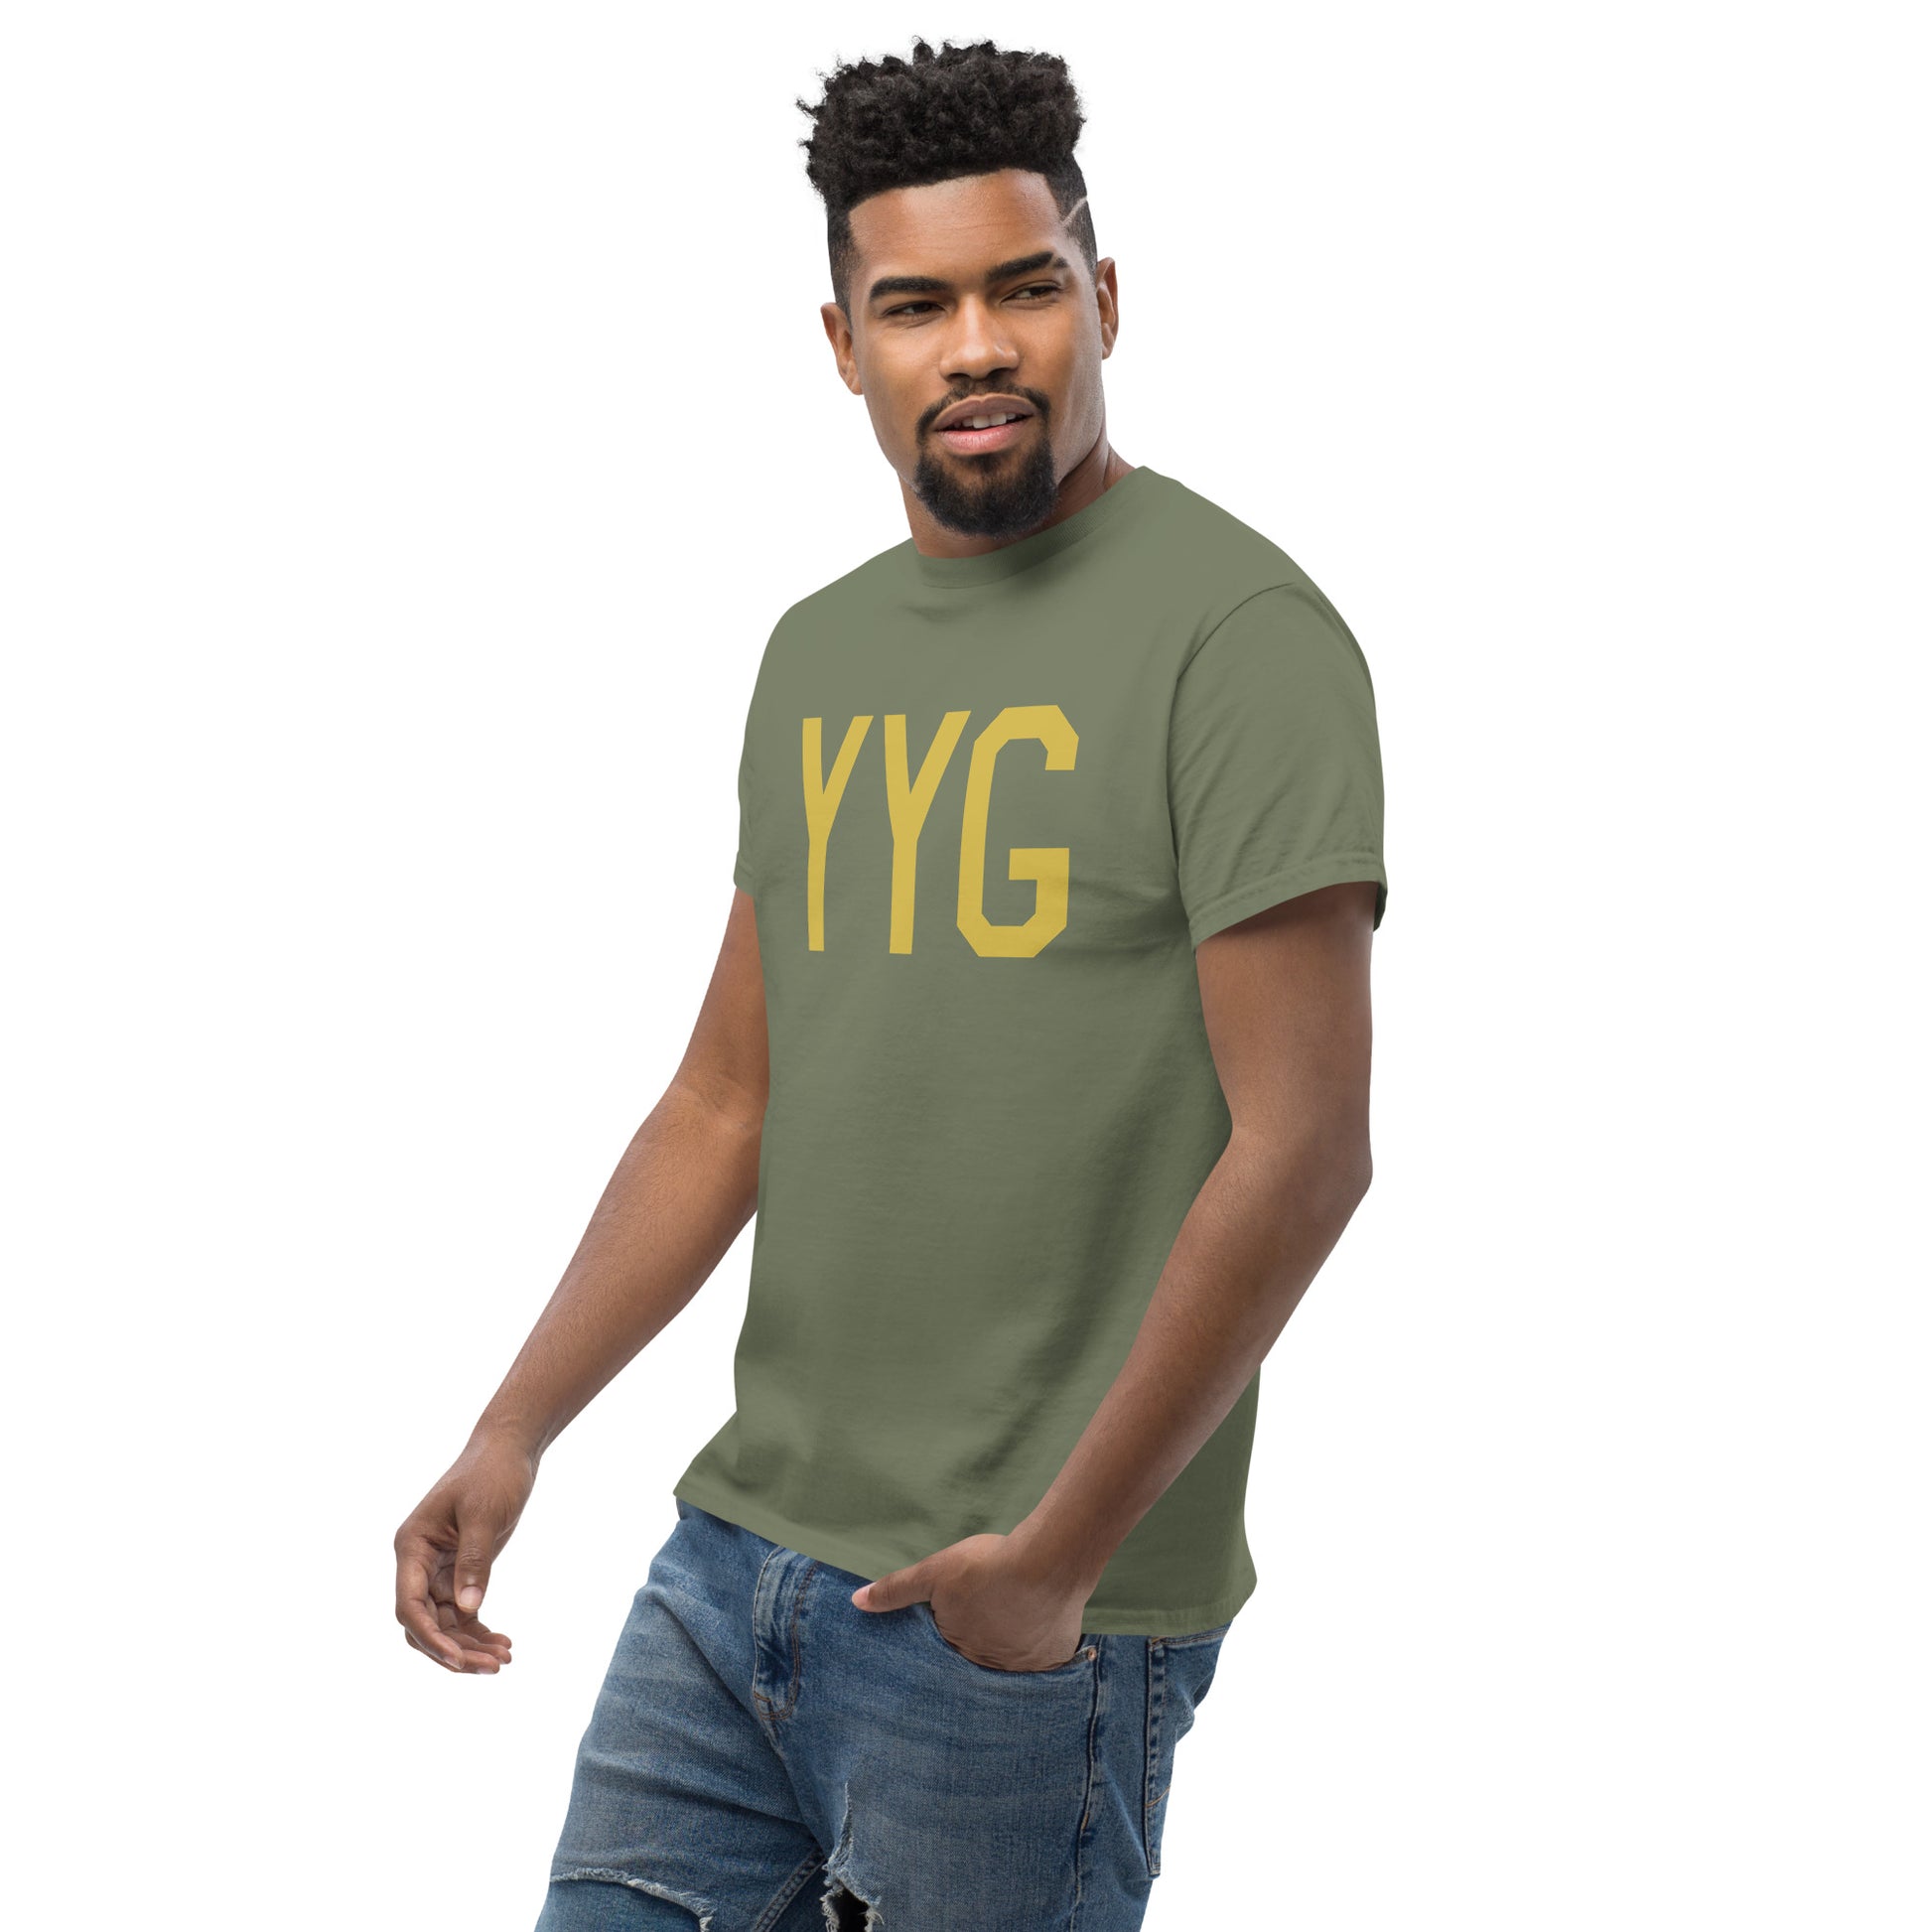 Aviation Enthusiast Men's Tee - Old Gold Graphic • YYG Charlottetown • YHM Designs - Image 07